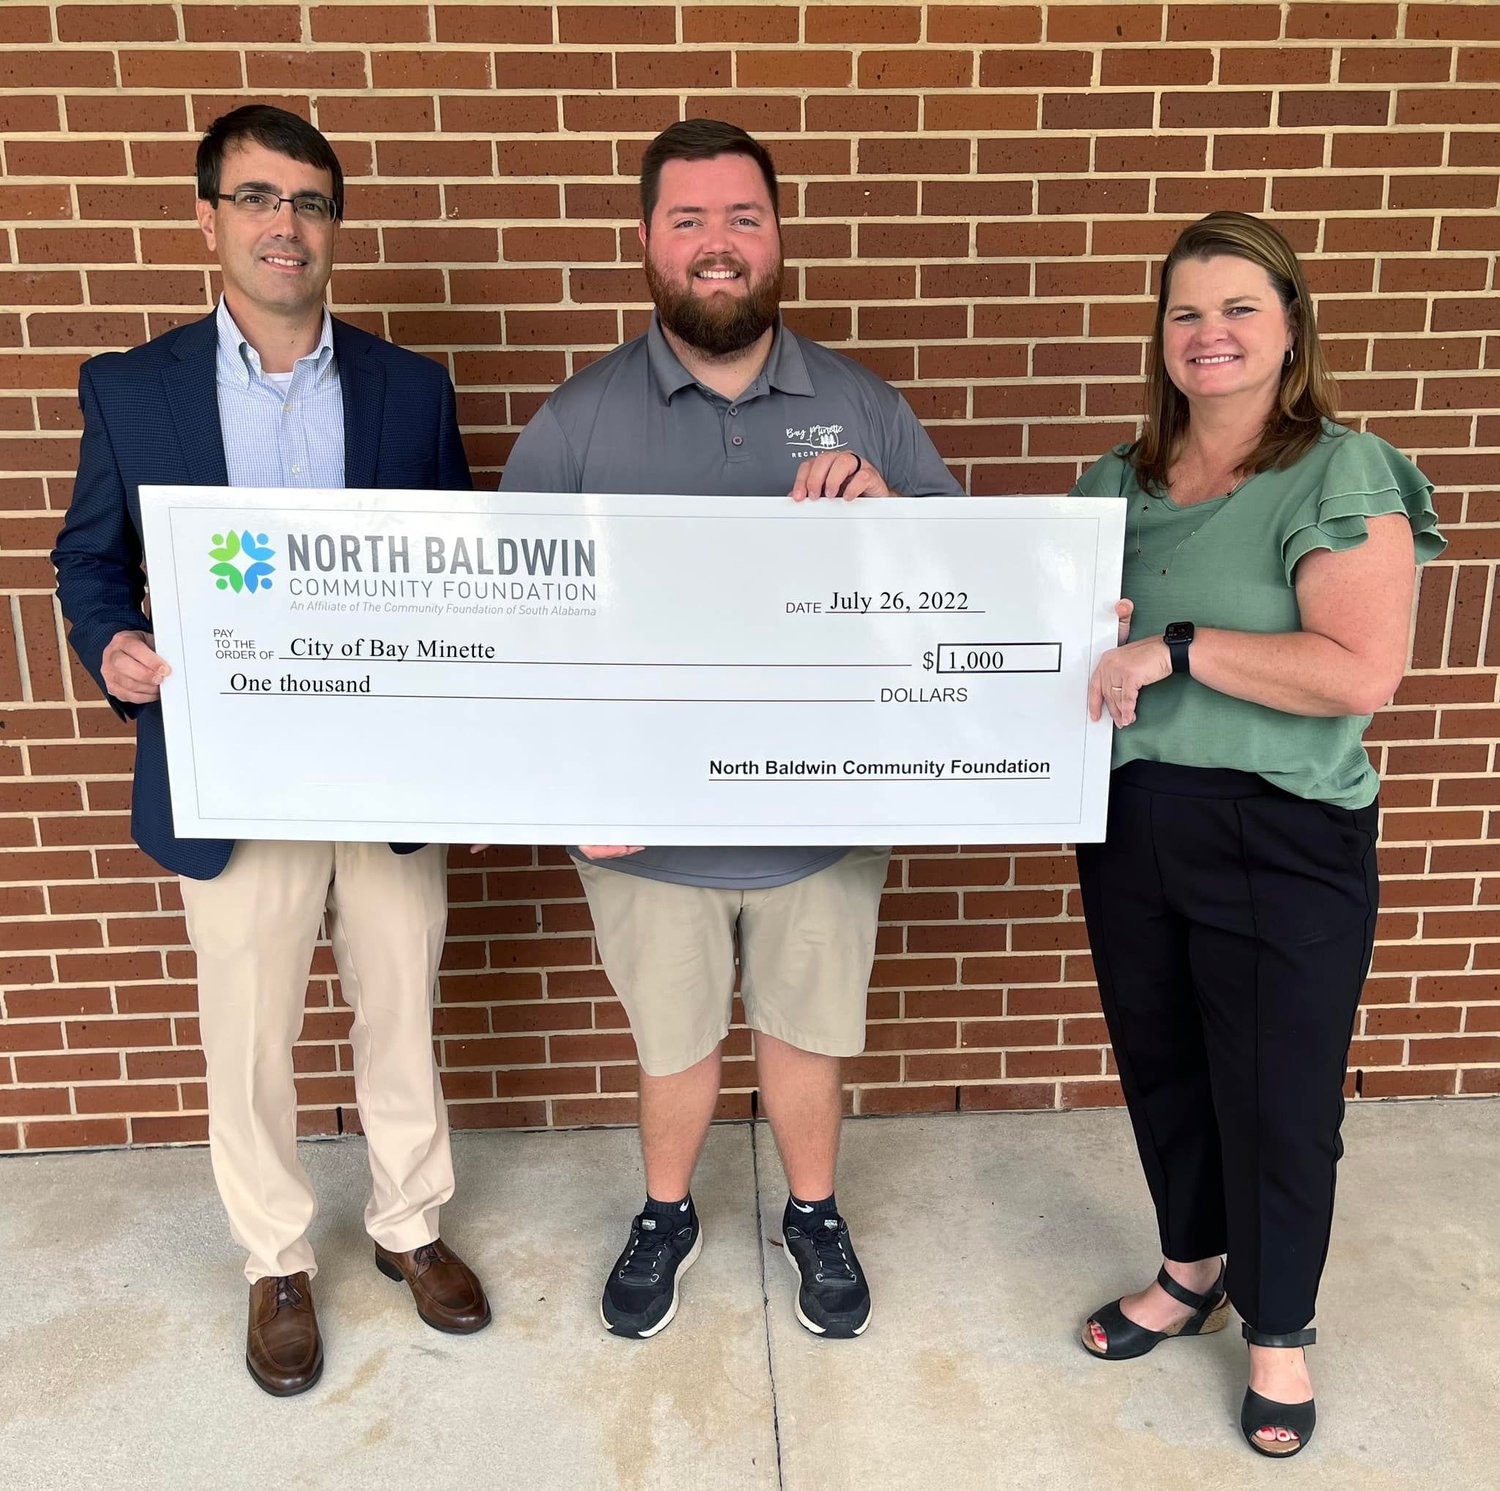 The North Baldwin Community Foundation, an affiliate of the Community Foundation of South Alabama, donated $1,000 to help kick off the Bay Minette Recreation Department’s inaugural Flag Football season this summer.